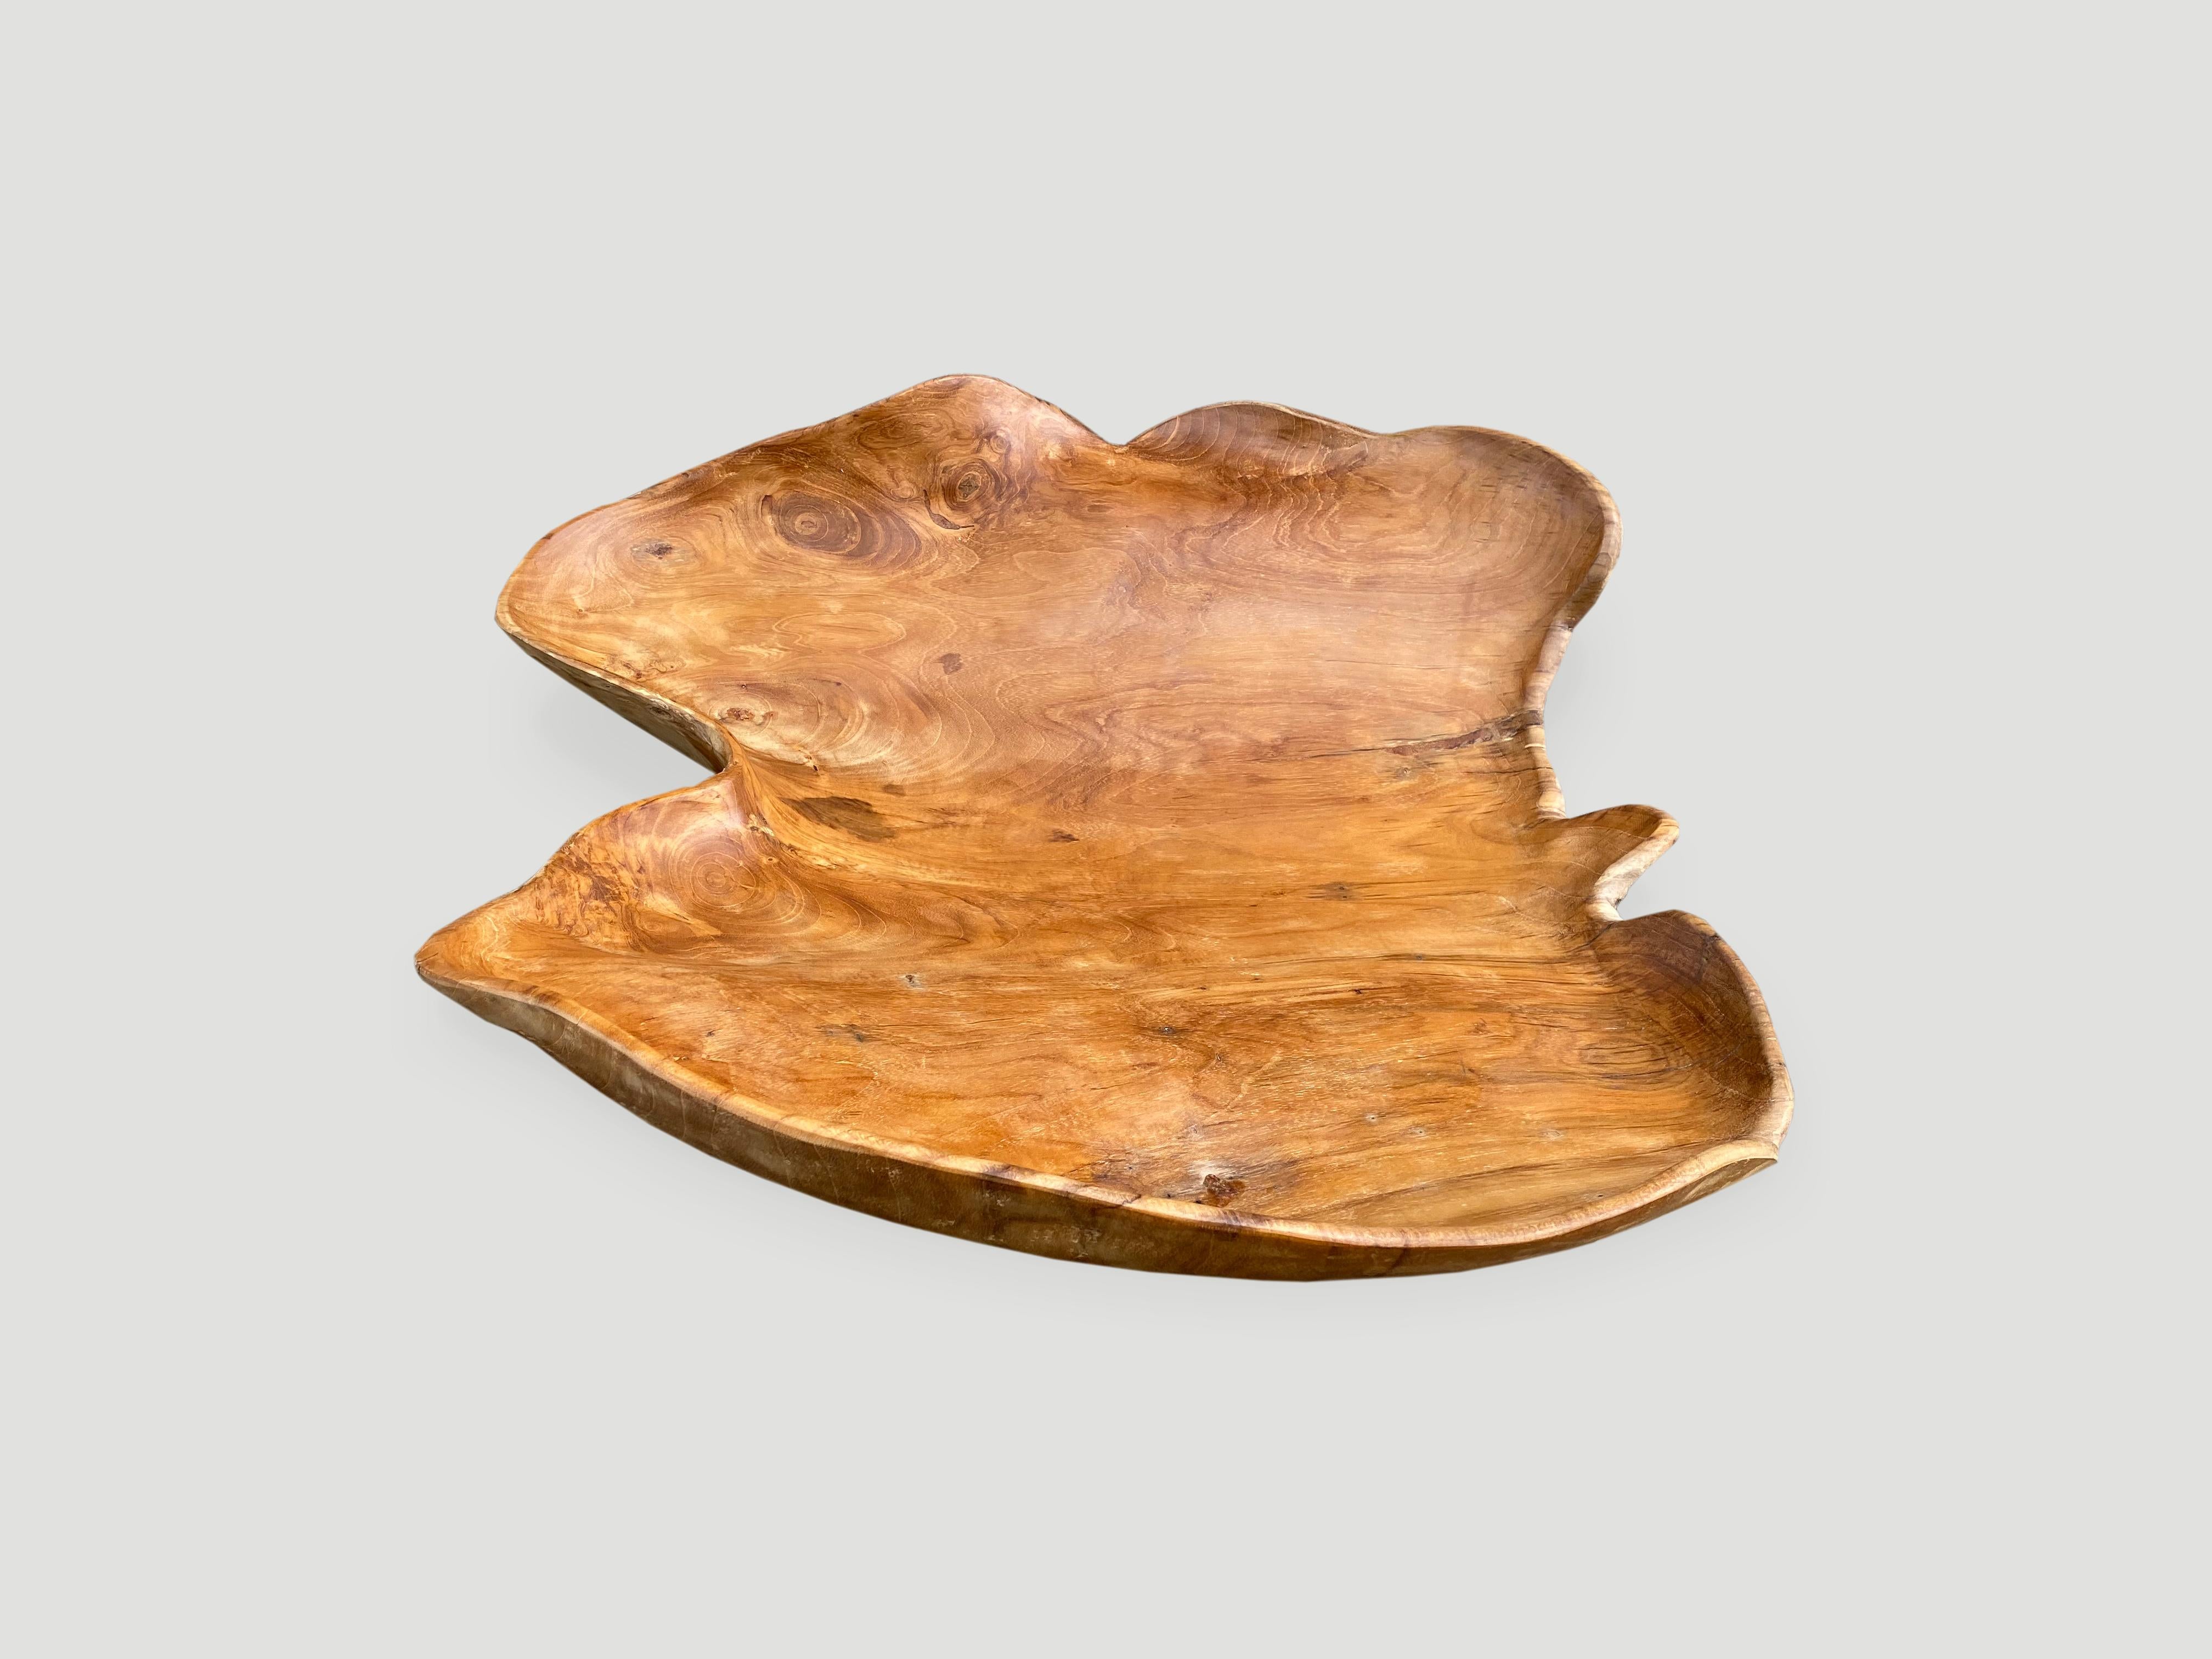 Beautiful grain on this Minimalist teak bowl, hand carved from a single piece of reclaimed teak wood.

This bowl or tray was sourced in the spirit of wabi-sabi, a Japanese philosophy that beauty can be found in imperfection and impermanence. It is